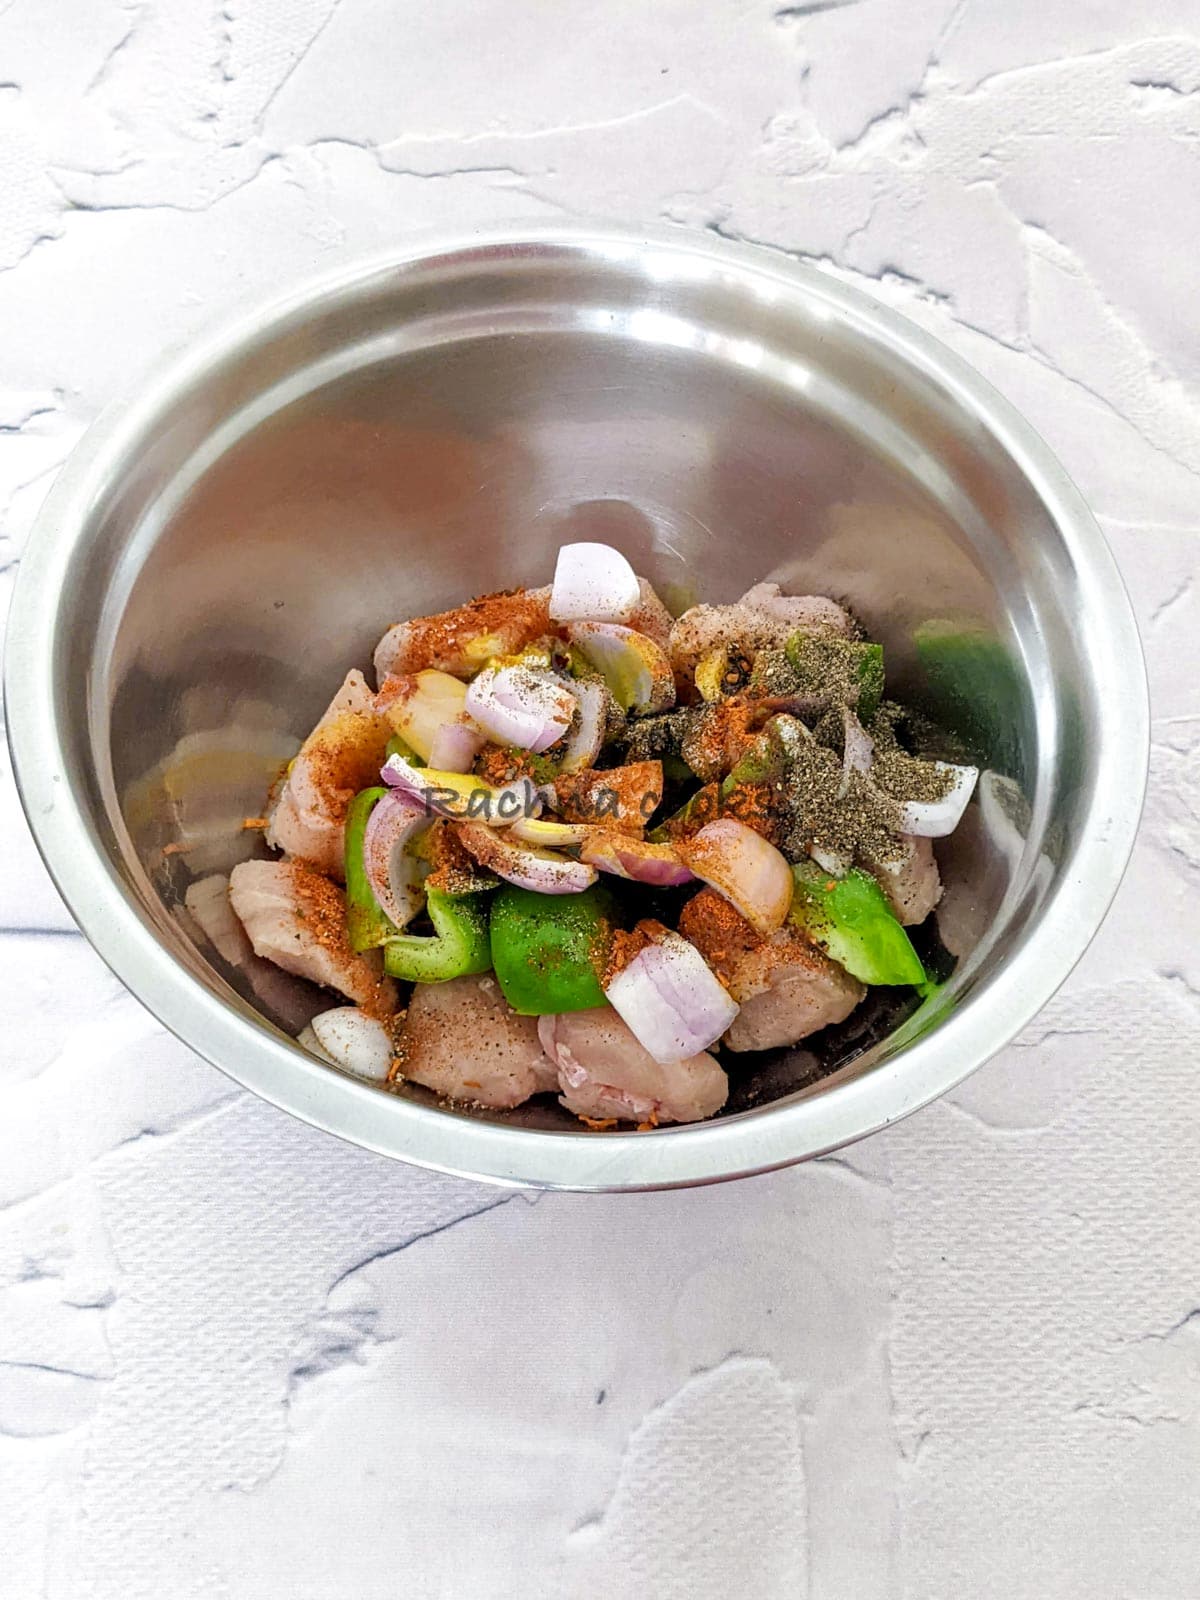 Spices and oil on top of peppers, onion and chicken cubes in a steel bowl.